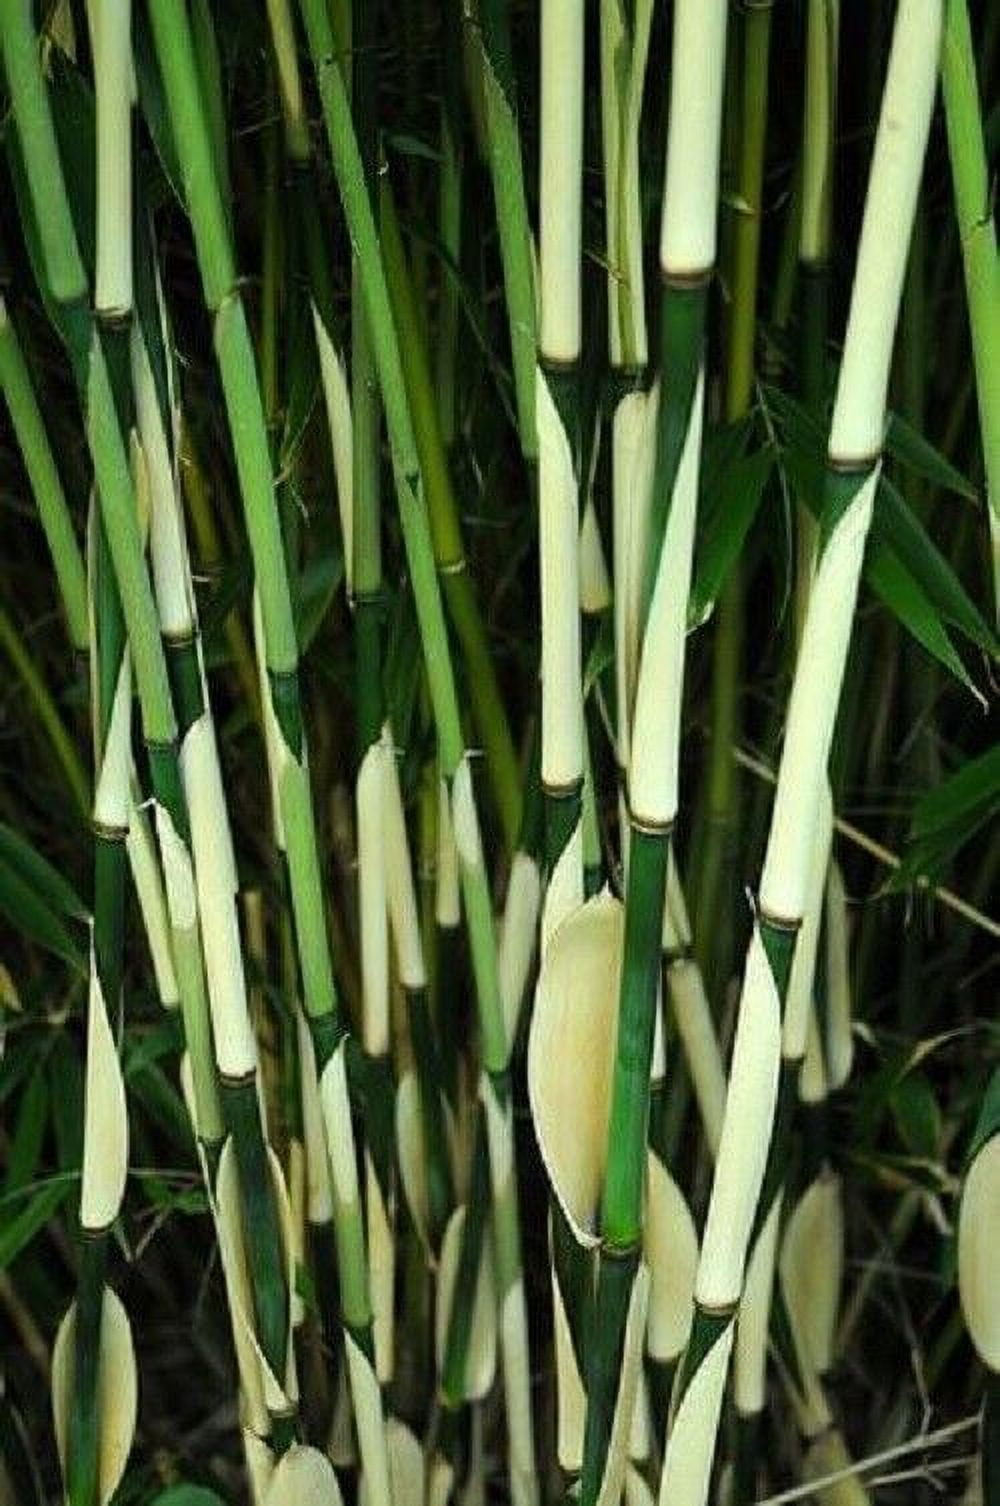 50 Fargesia Bamboo Seeds Privacy Garden Clumping Exotic Shade Seed 397